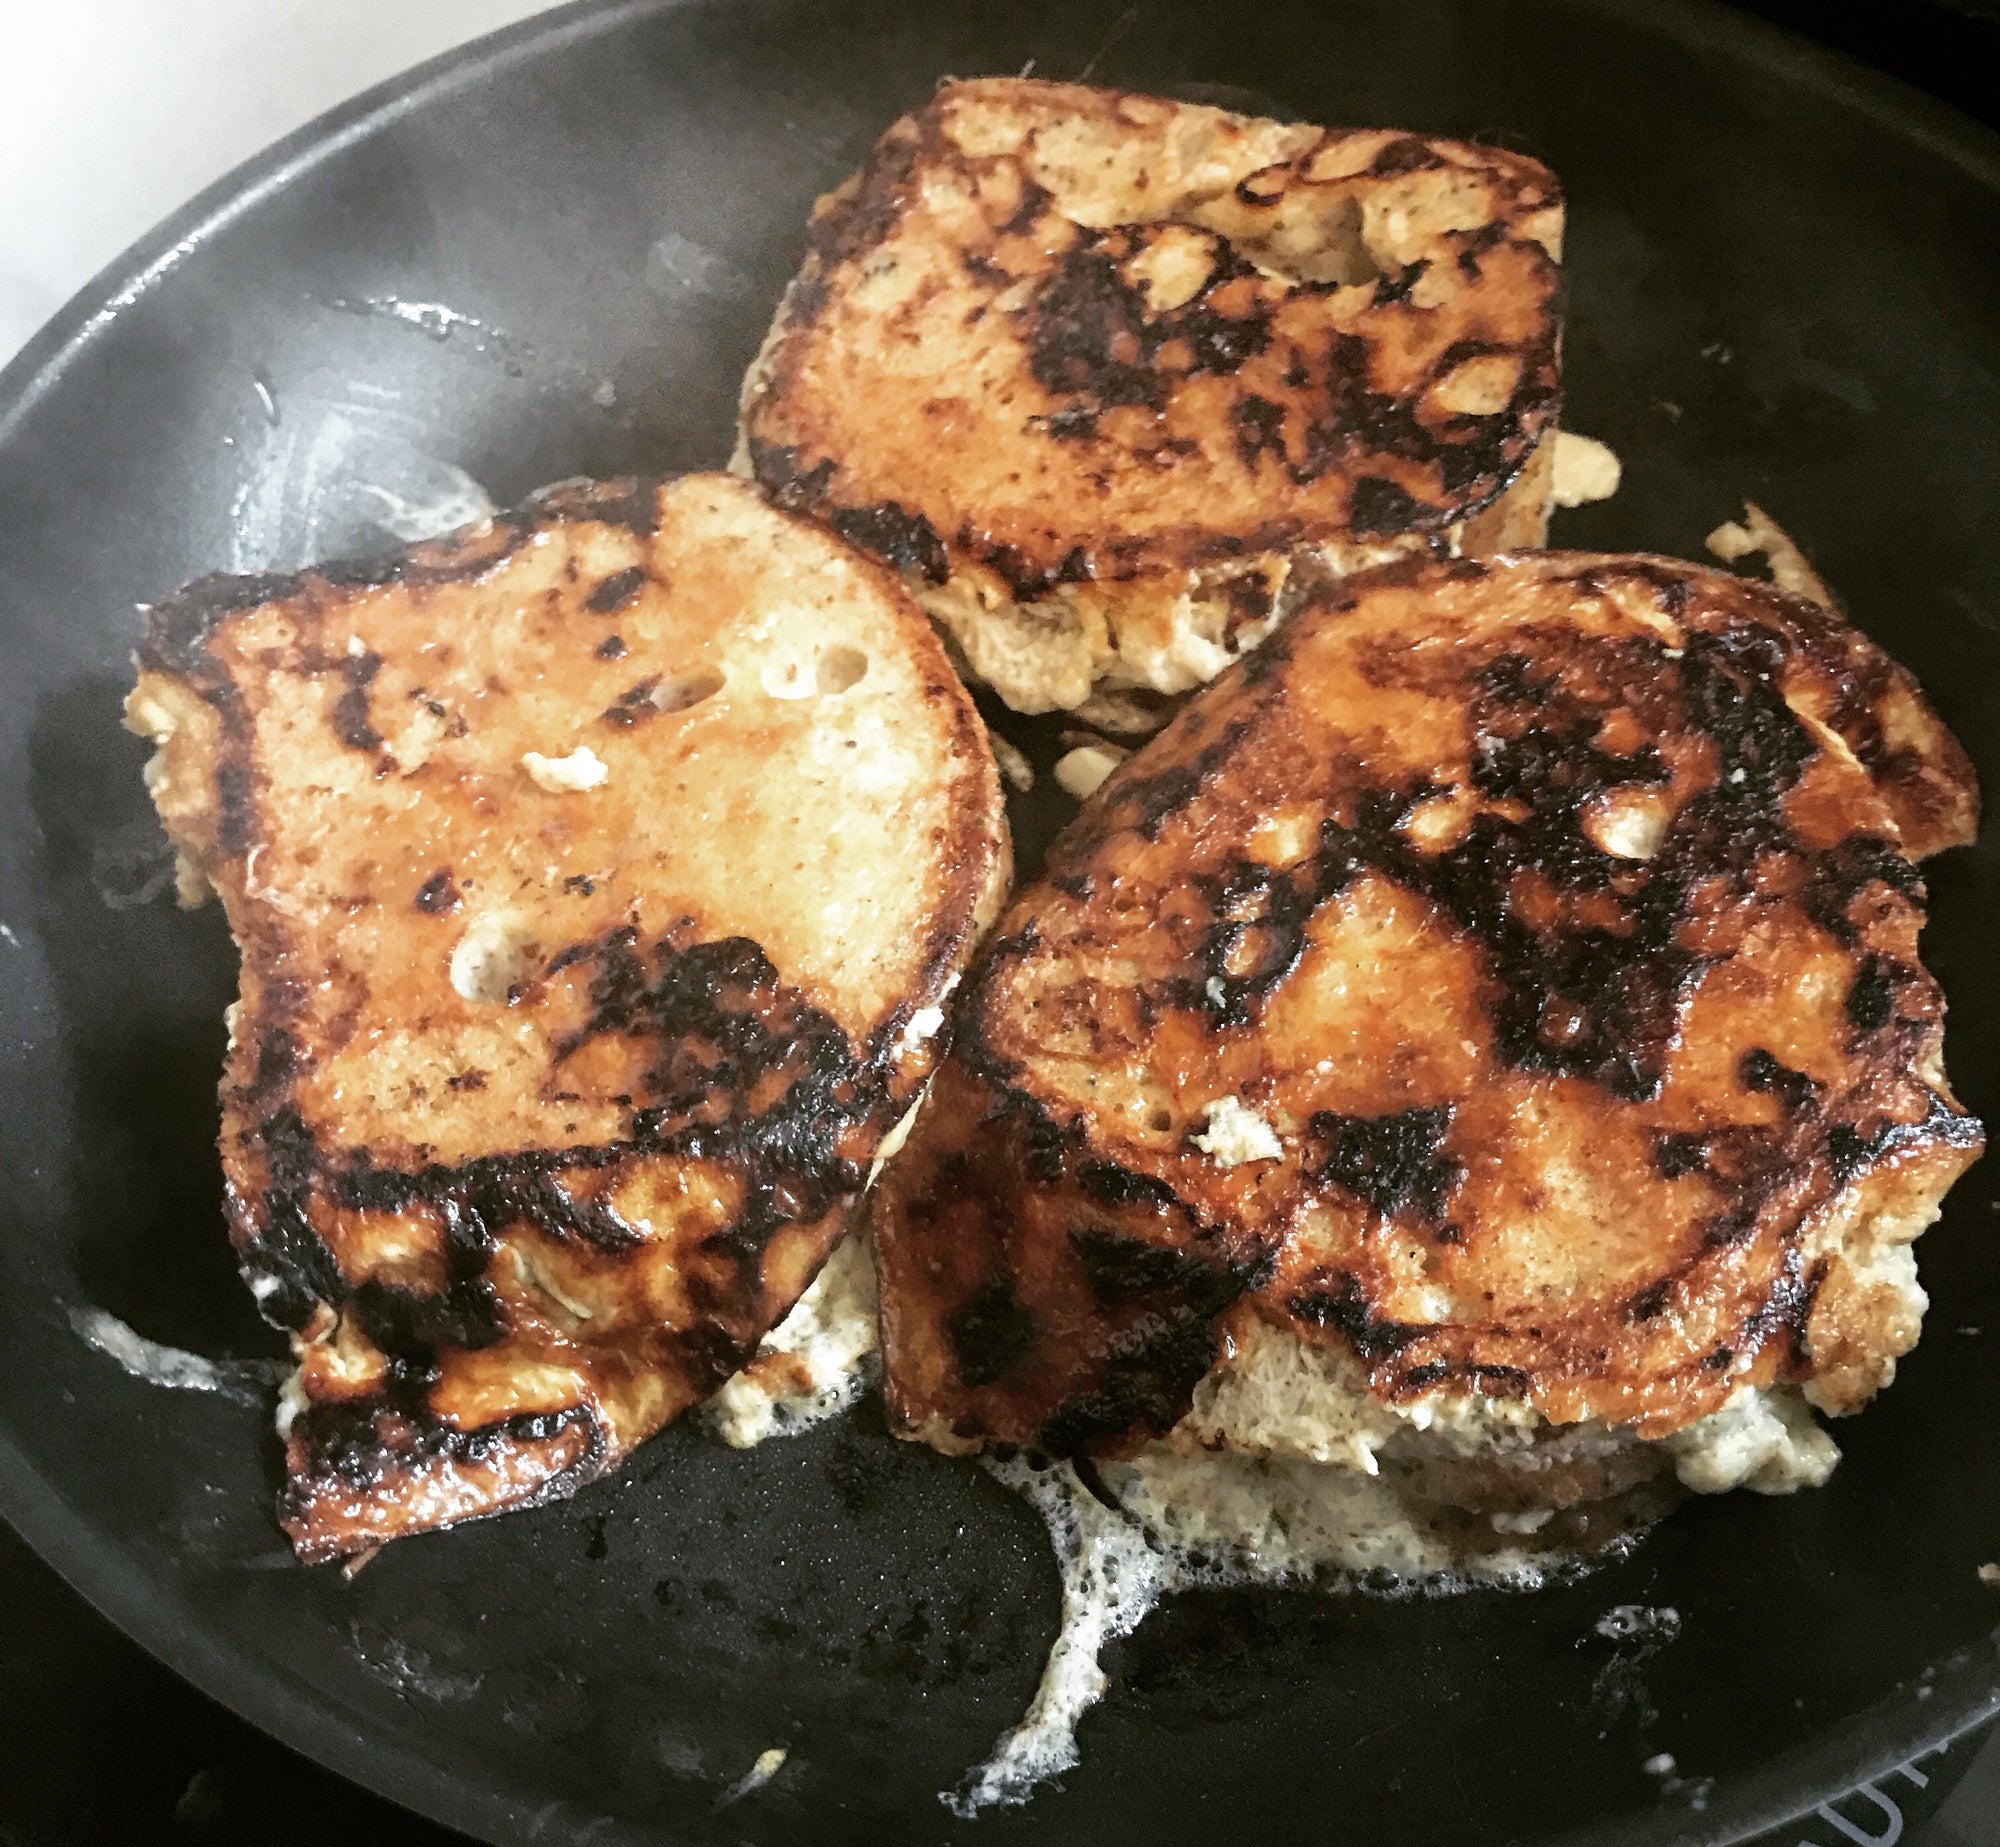 fueled friday: gluten free french toast